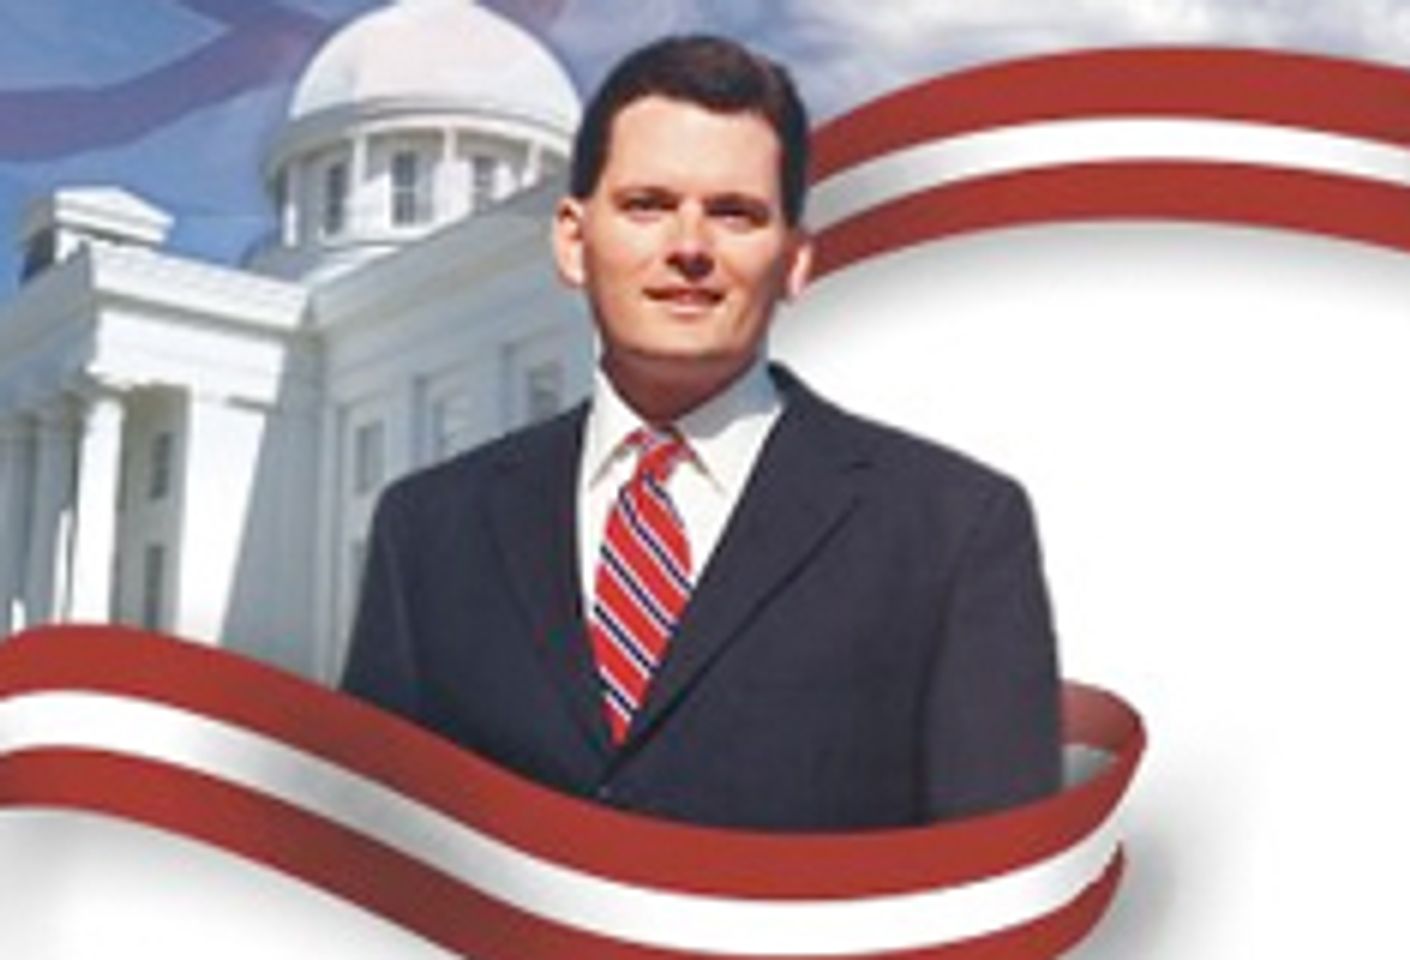 Alabama's Anti-Gay Attorney General Caught in Bed with Male Aide